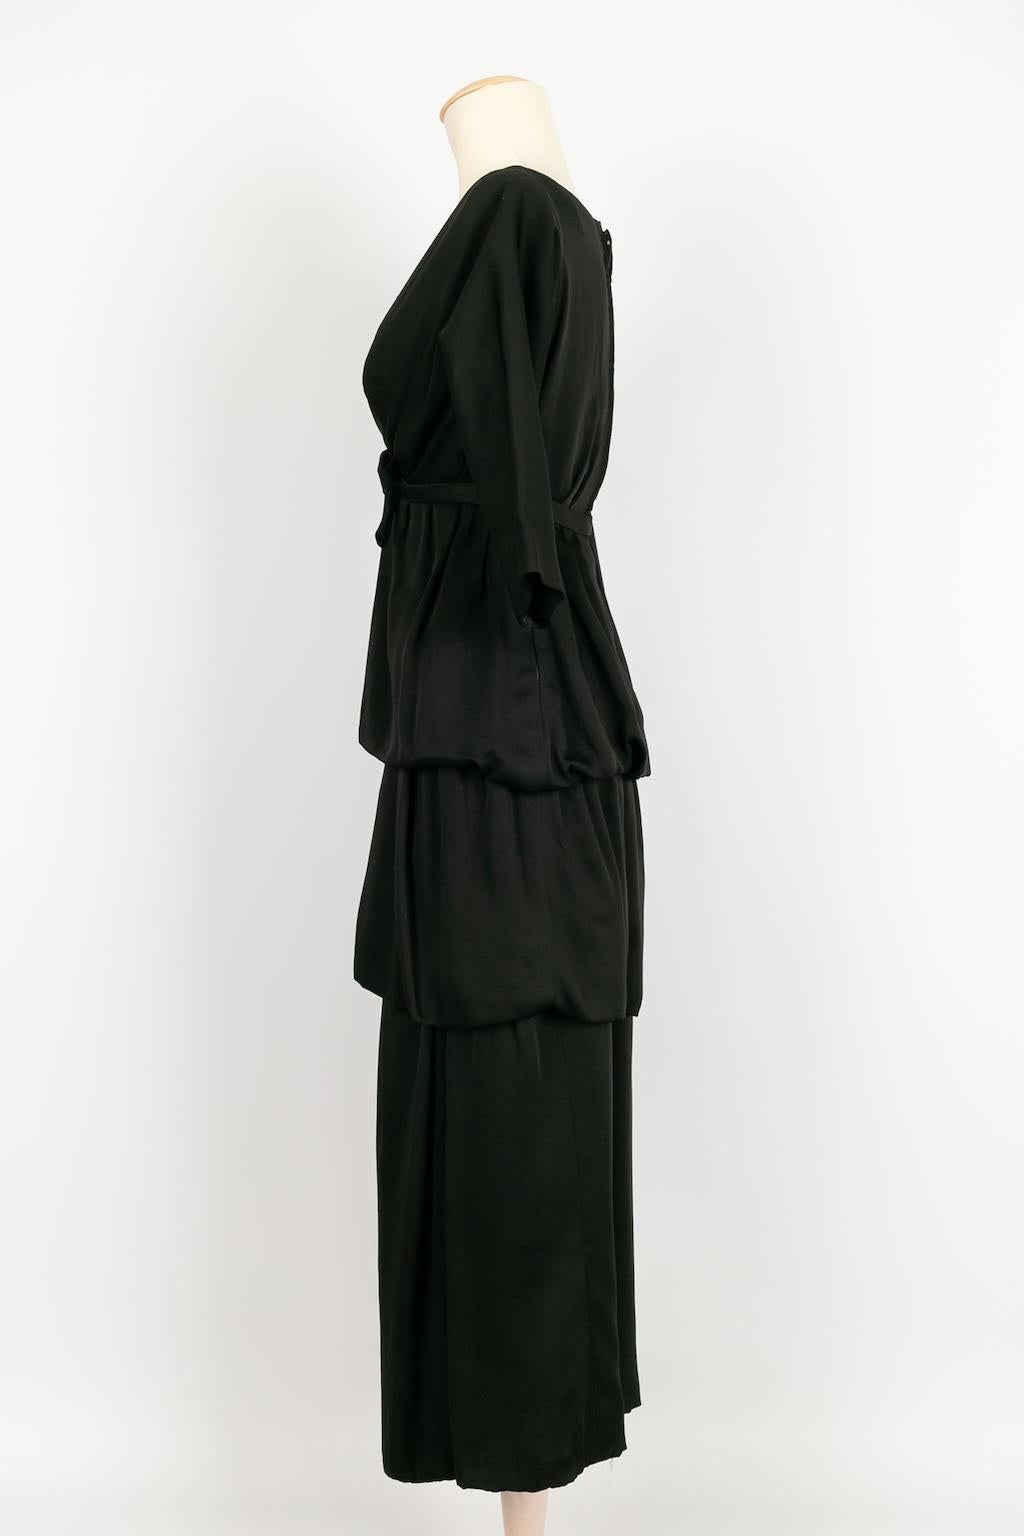 Pierre Cardin -Long silk long sleeve dress. No size label, it fits a 36FR. Model dating from the 1950s. To note, the lining has some tears.

Additional information: 
Dimensions: Chest: 36 cm, Waist: 33 cm, Sleeve length: 40 cm, Length: 125